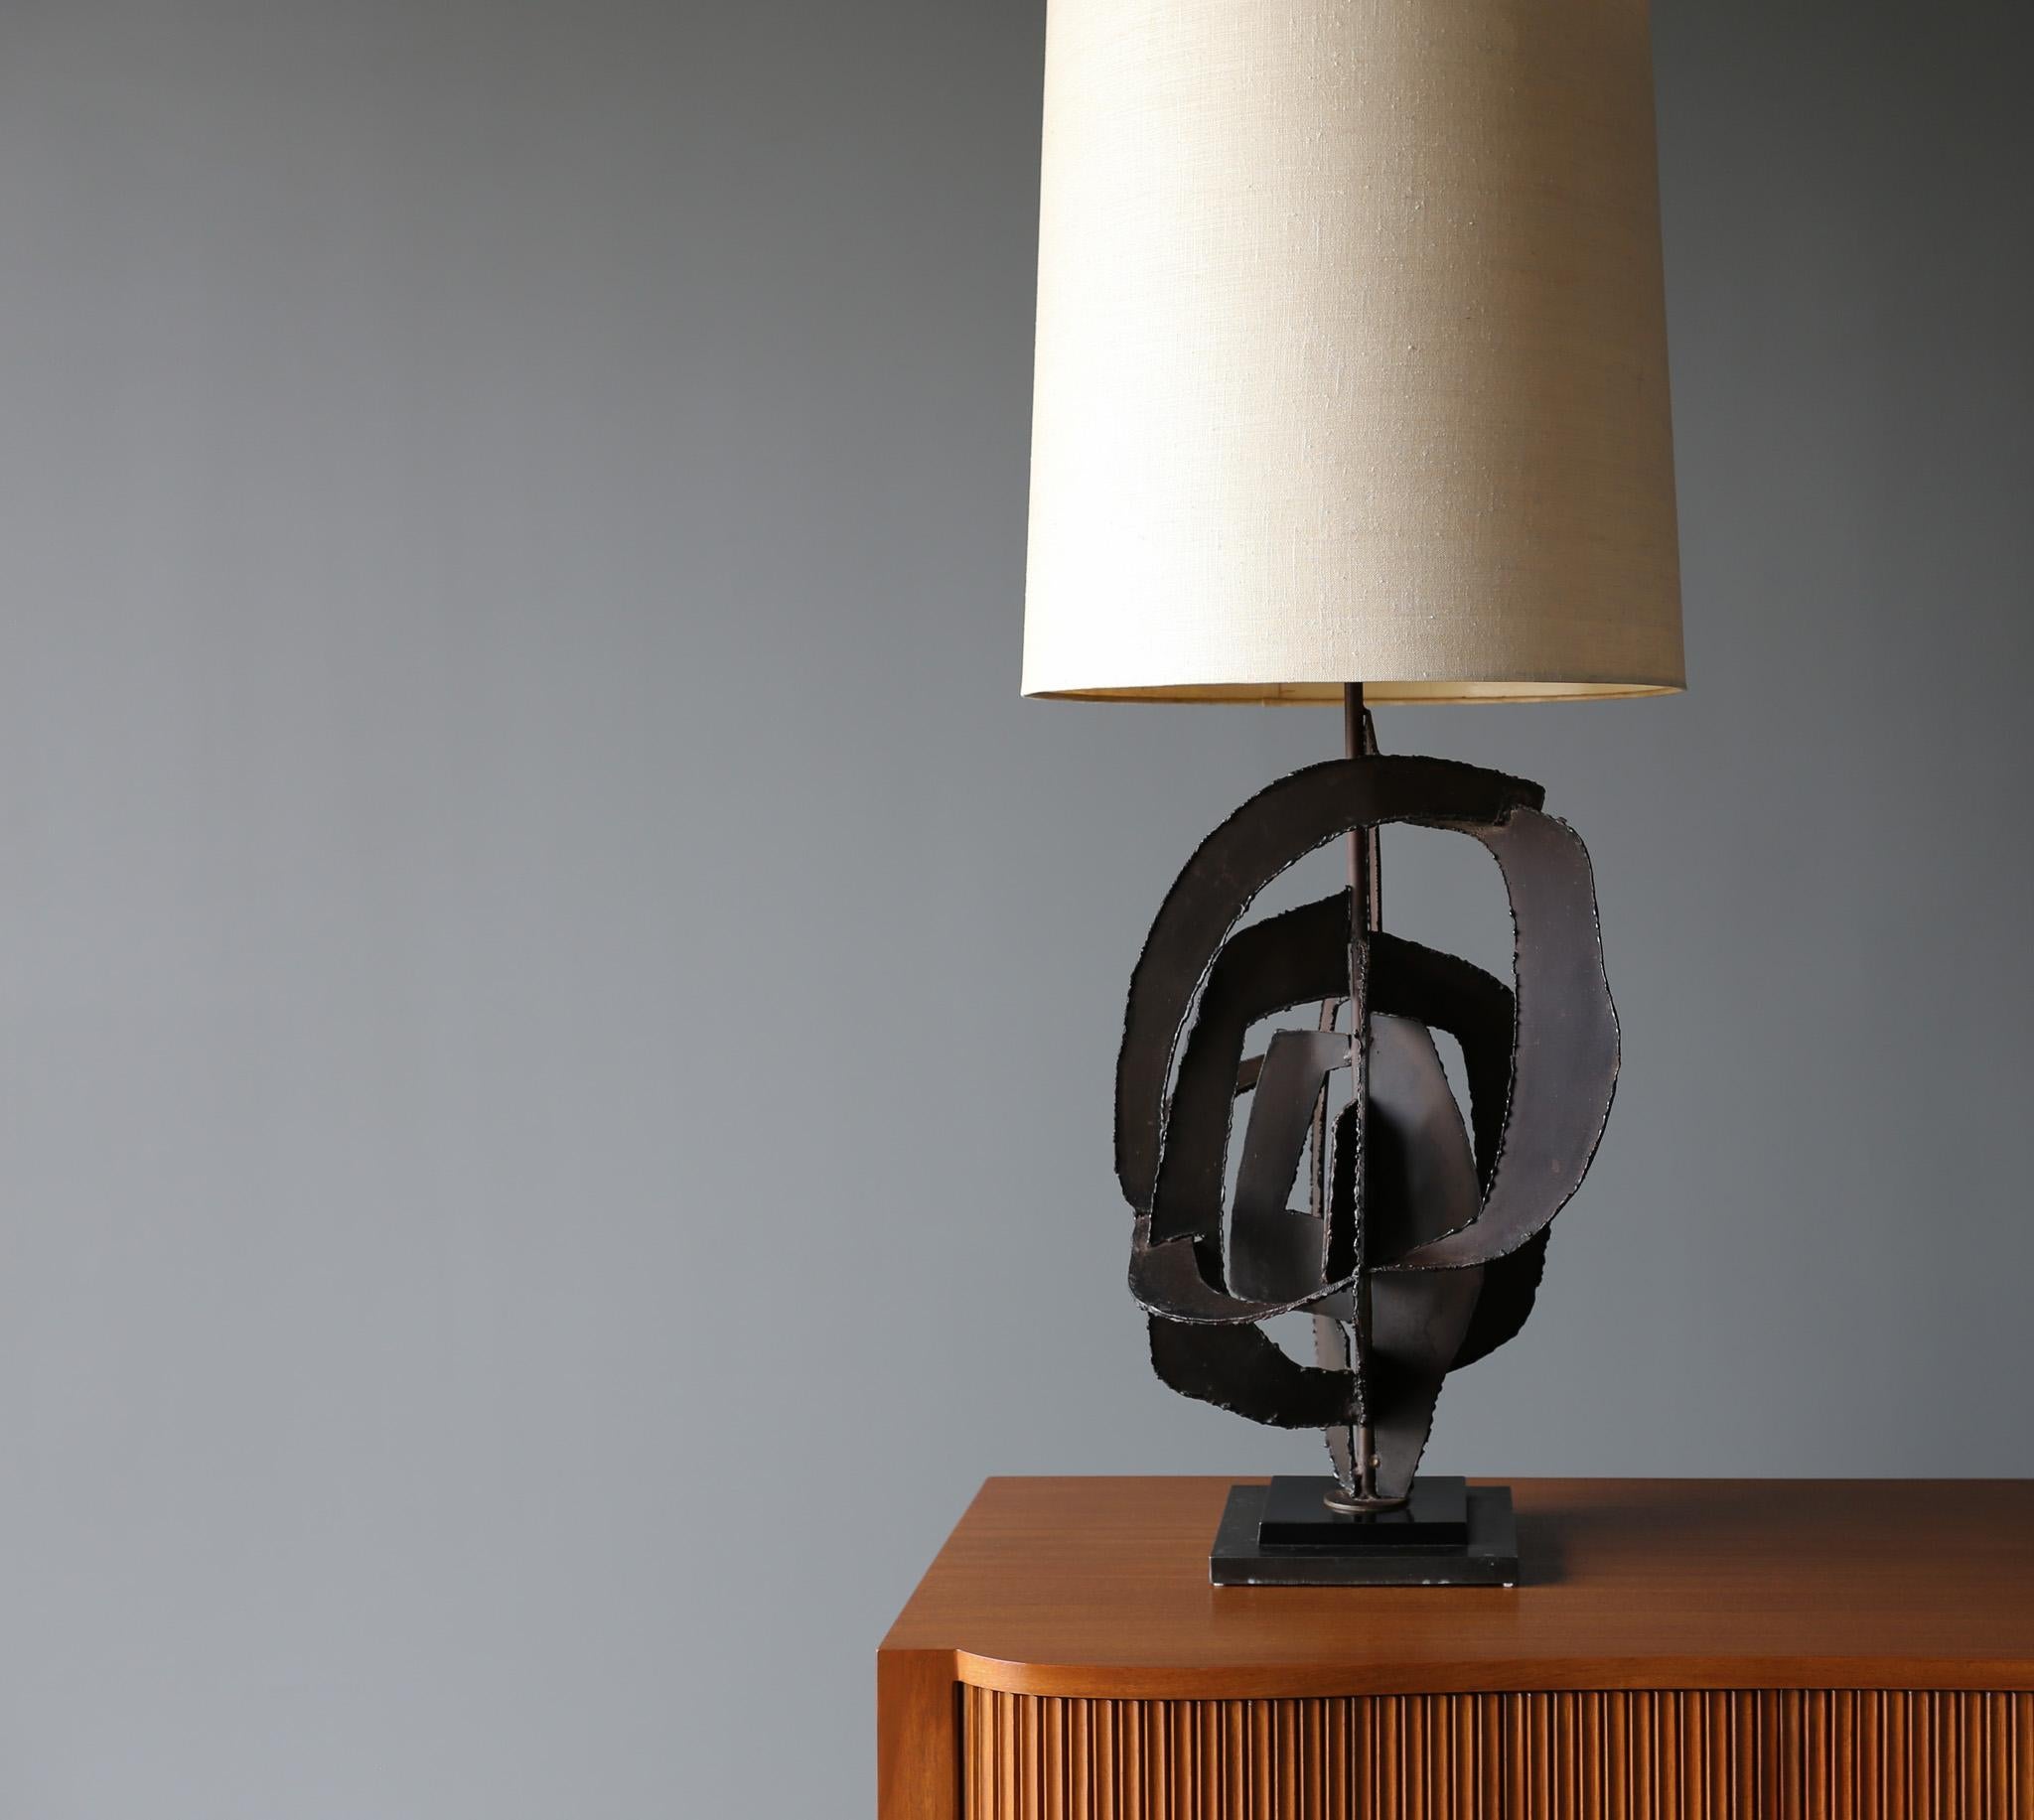 Mid-Century Modern Richard Barr Sculptural Table Lamp for the STUDIO Collection by Laurel, c.1965 For Sale